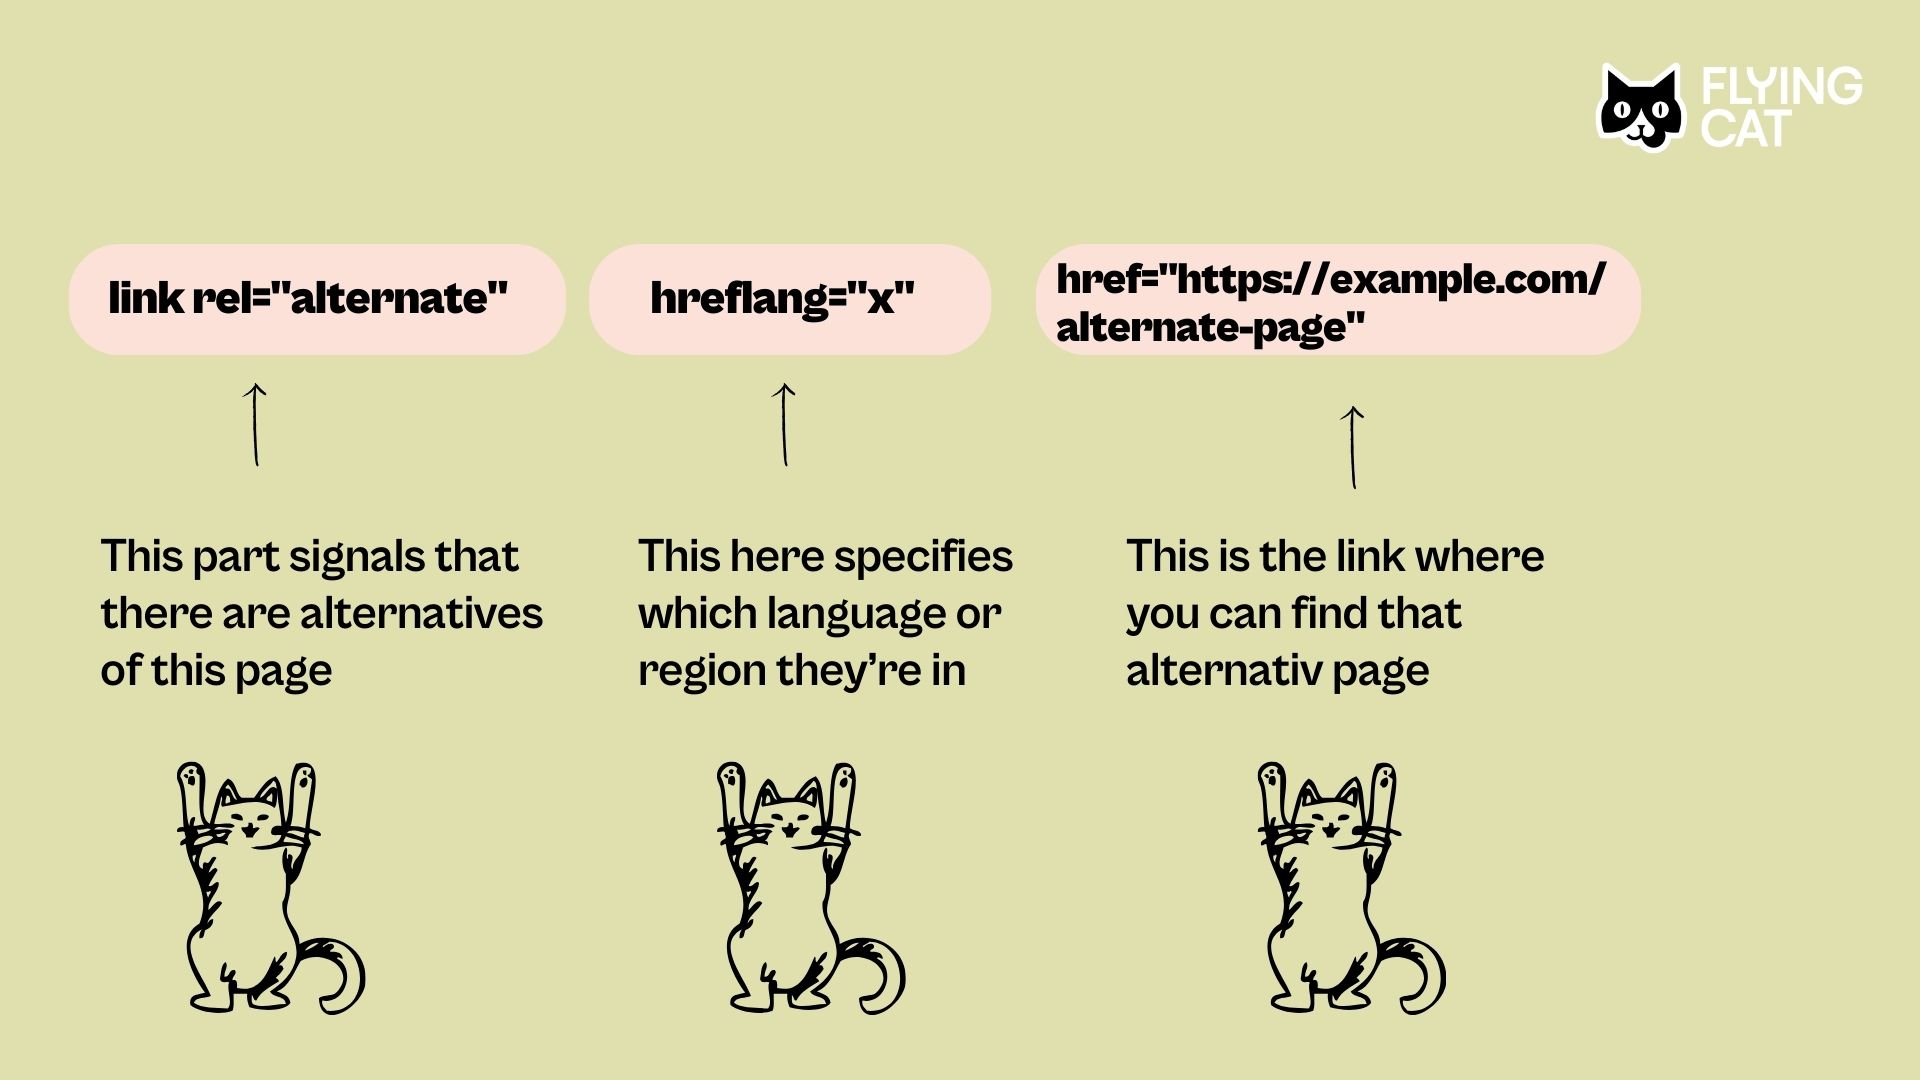 Image explaining the different sections of the hreflang tag. 